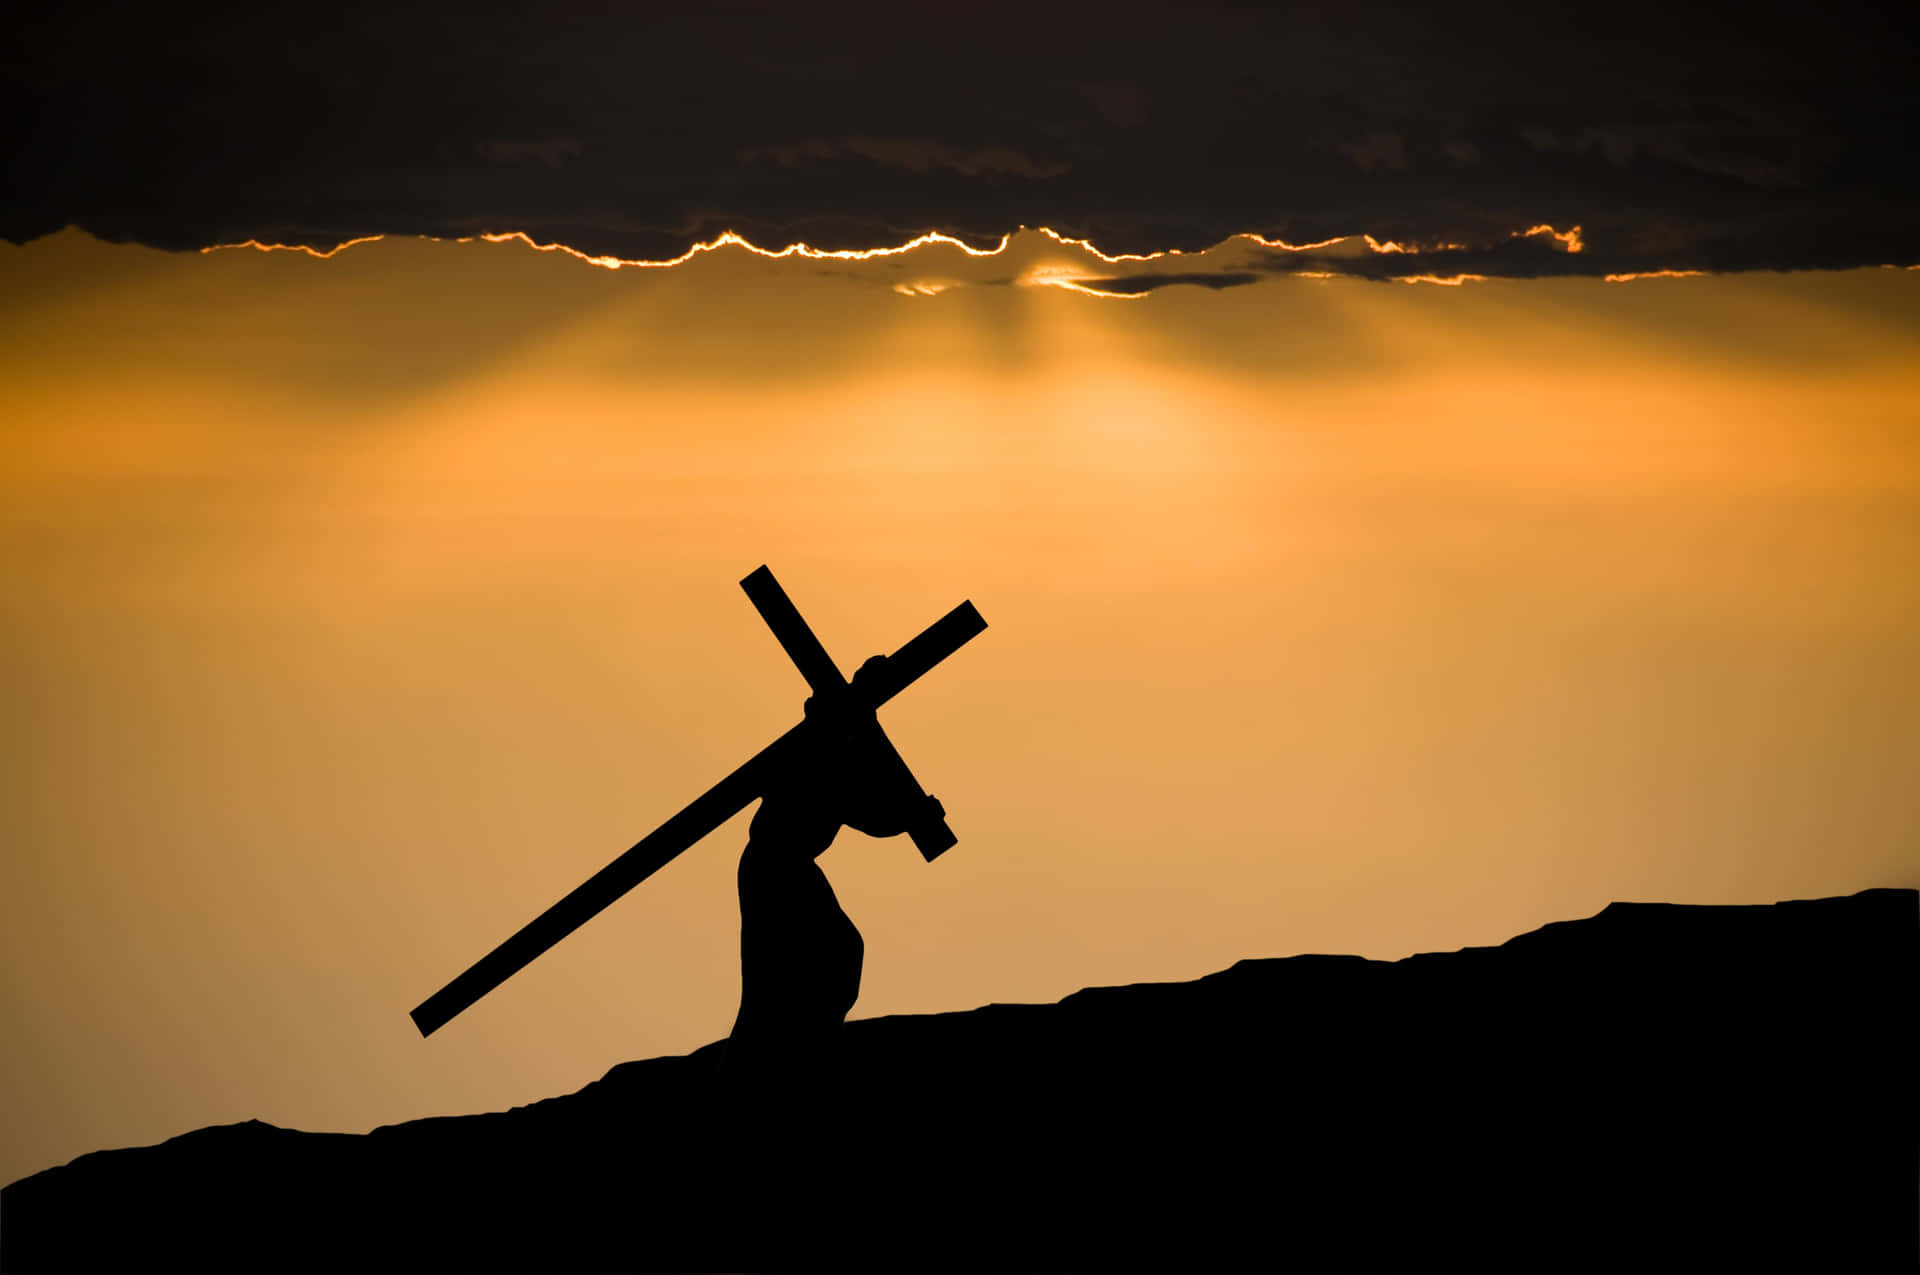 A Beautiful Good Friday Image with Cross and Candles